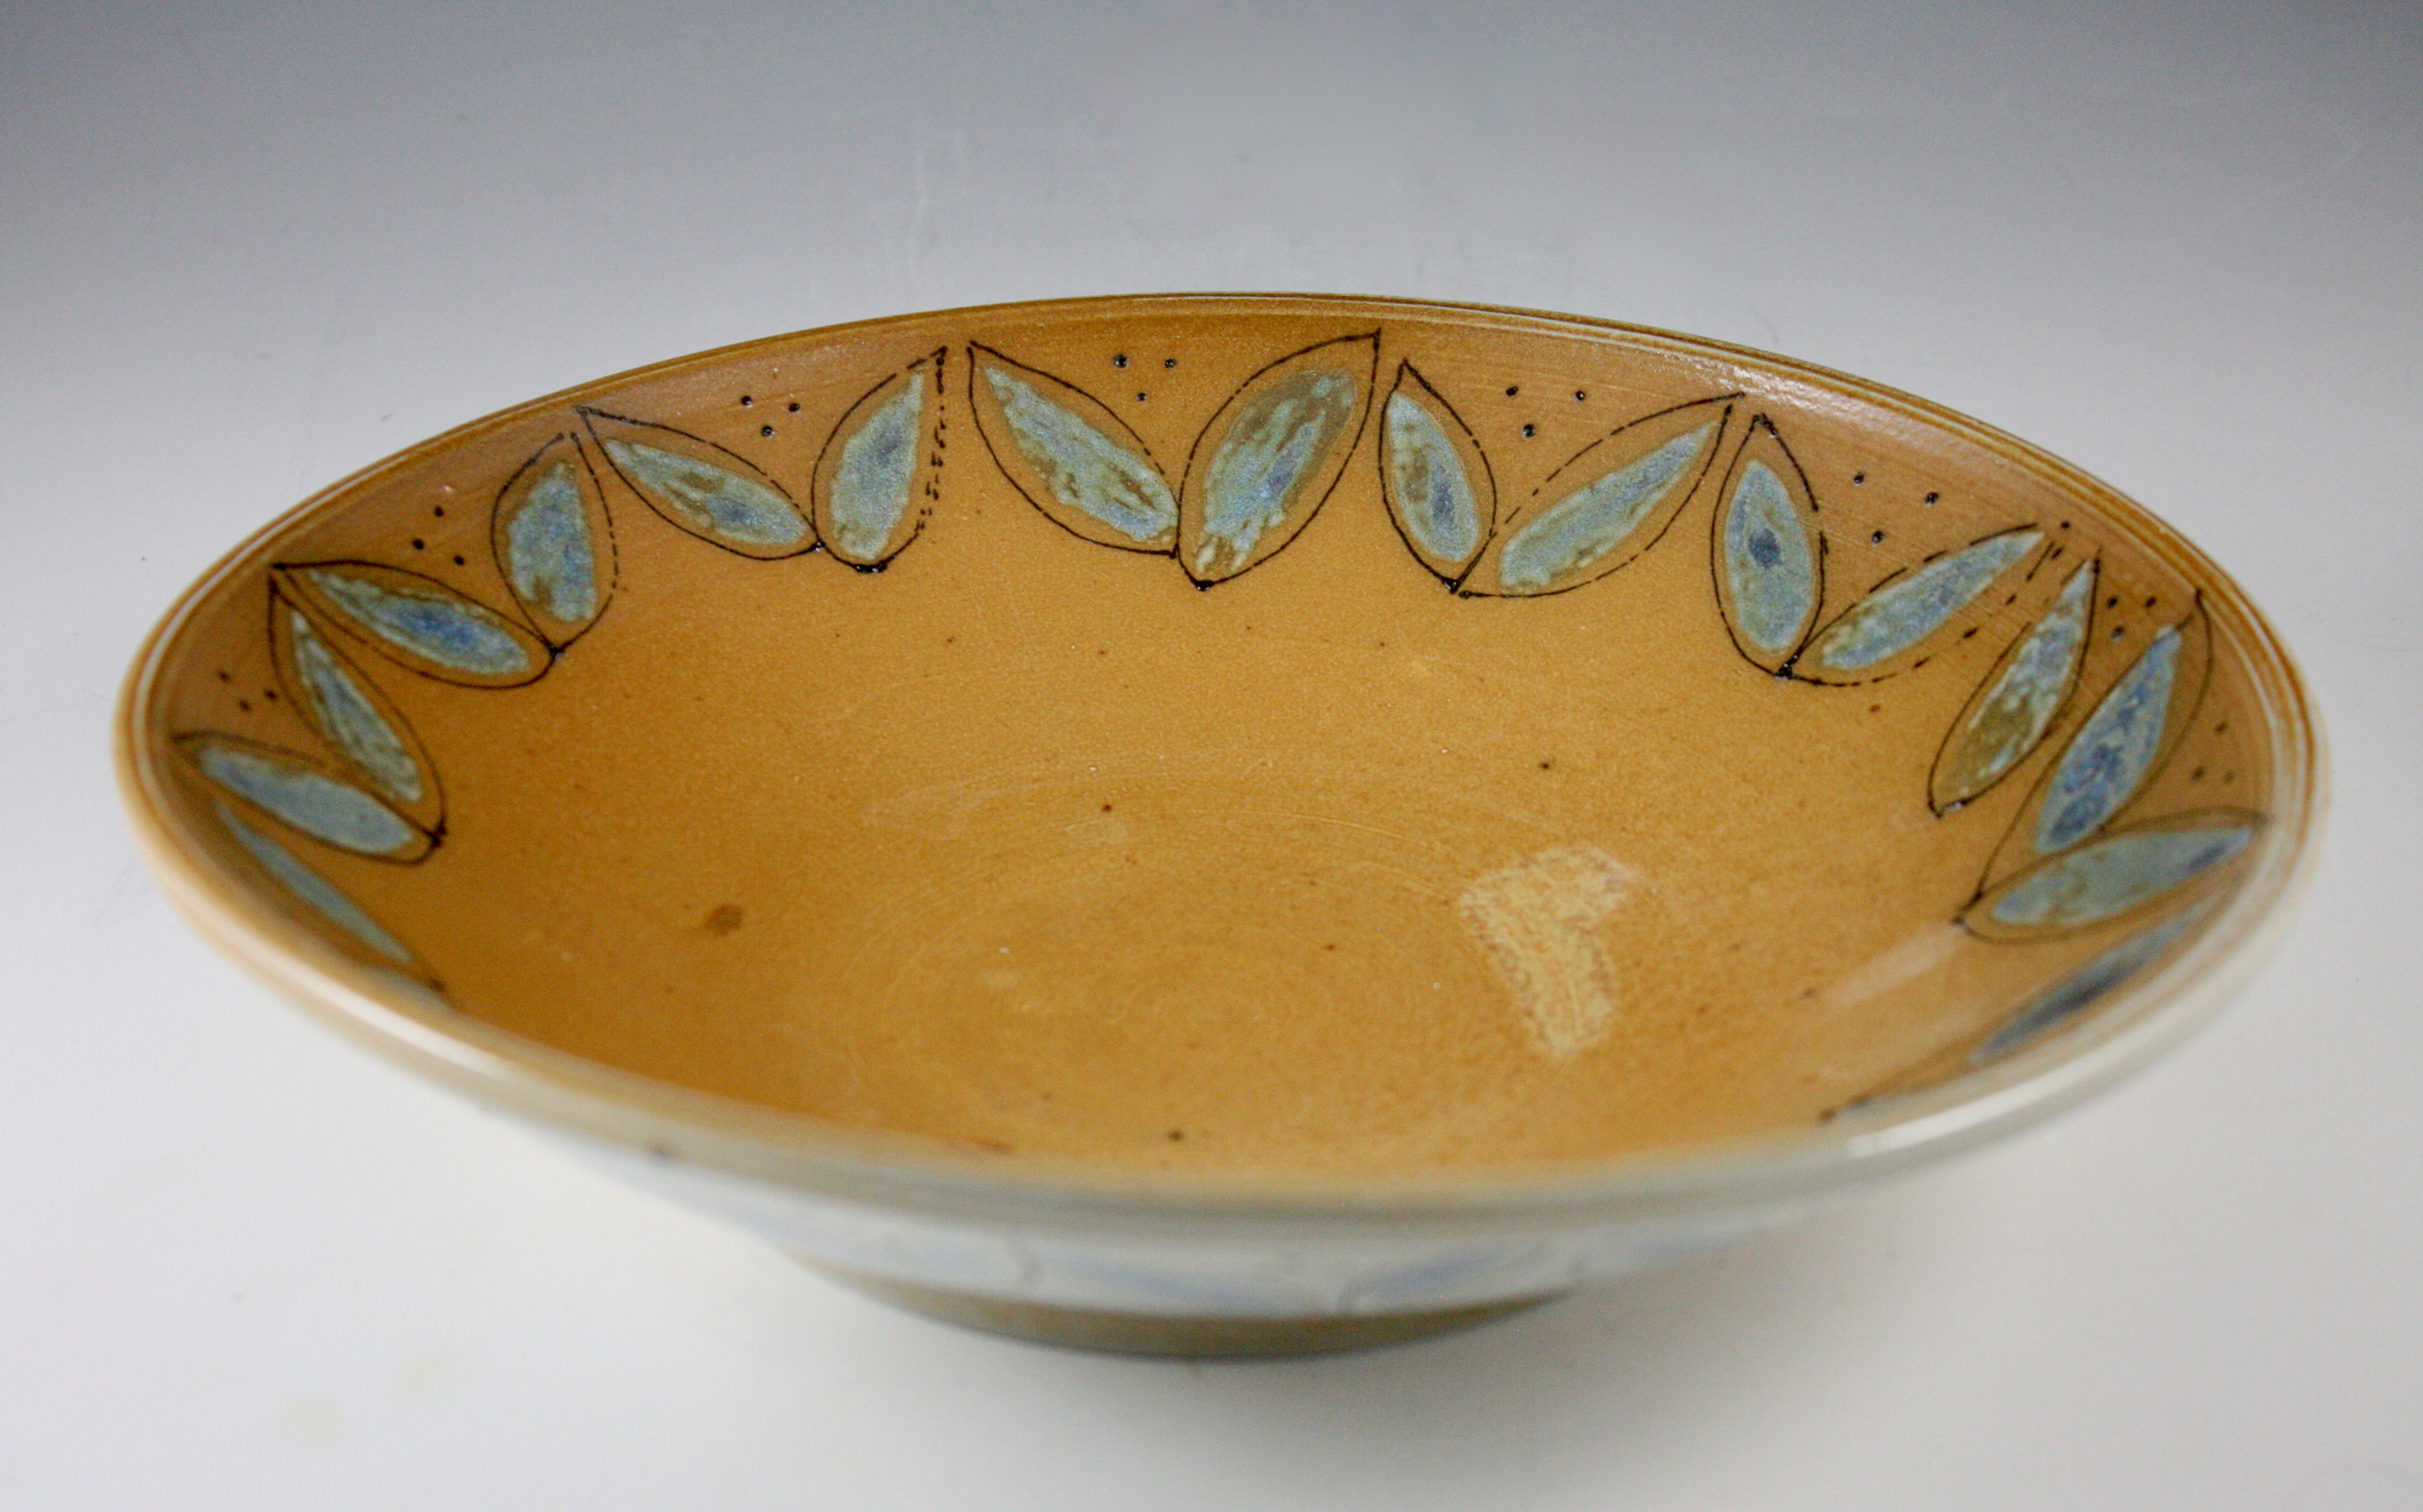 Rustic Open Bowl with Blue Leaf Accents 21-316